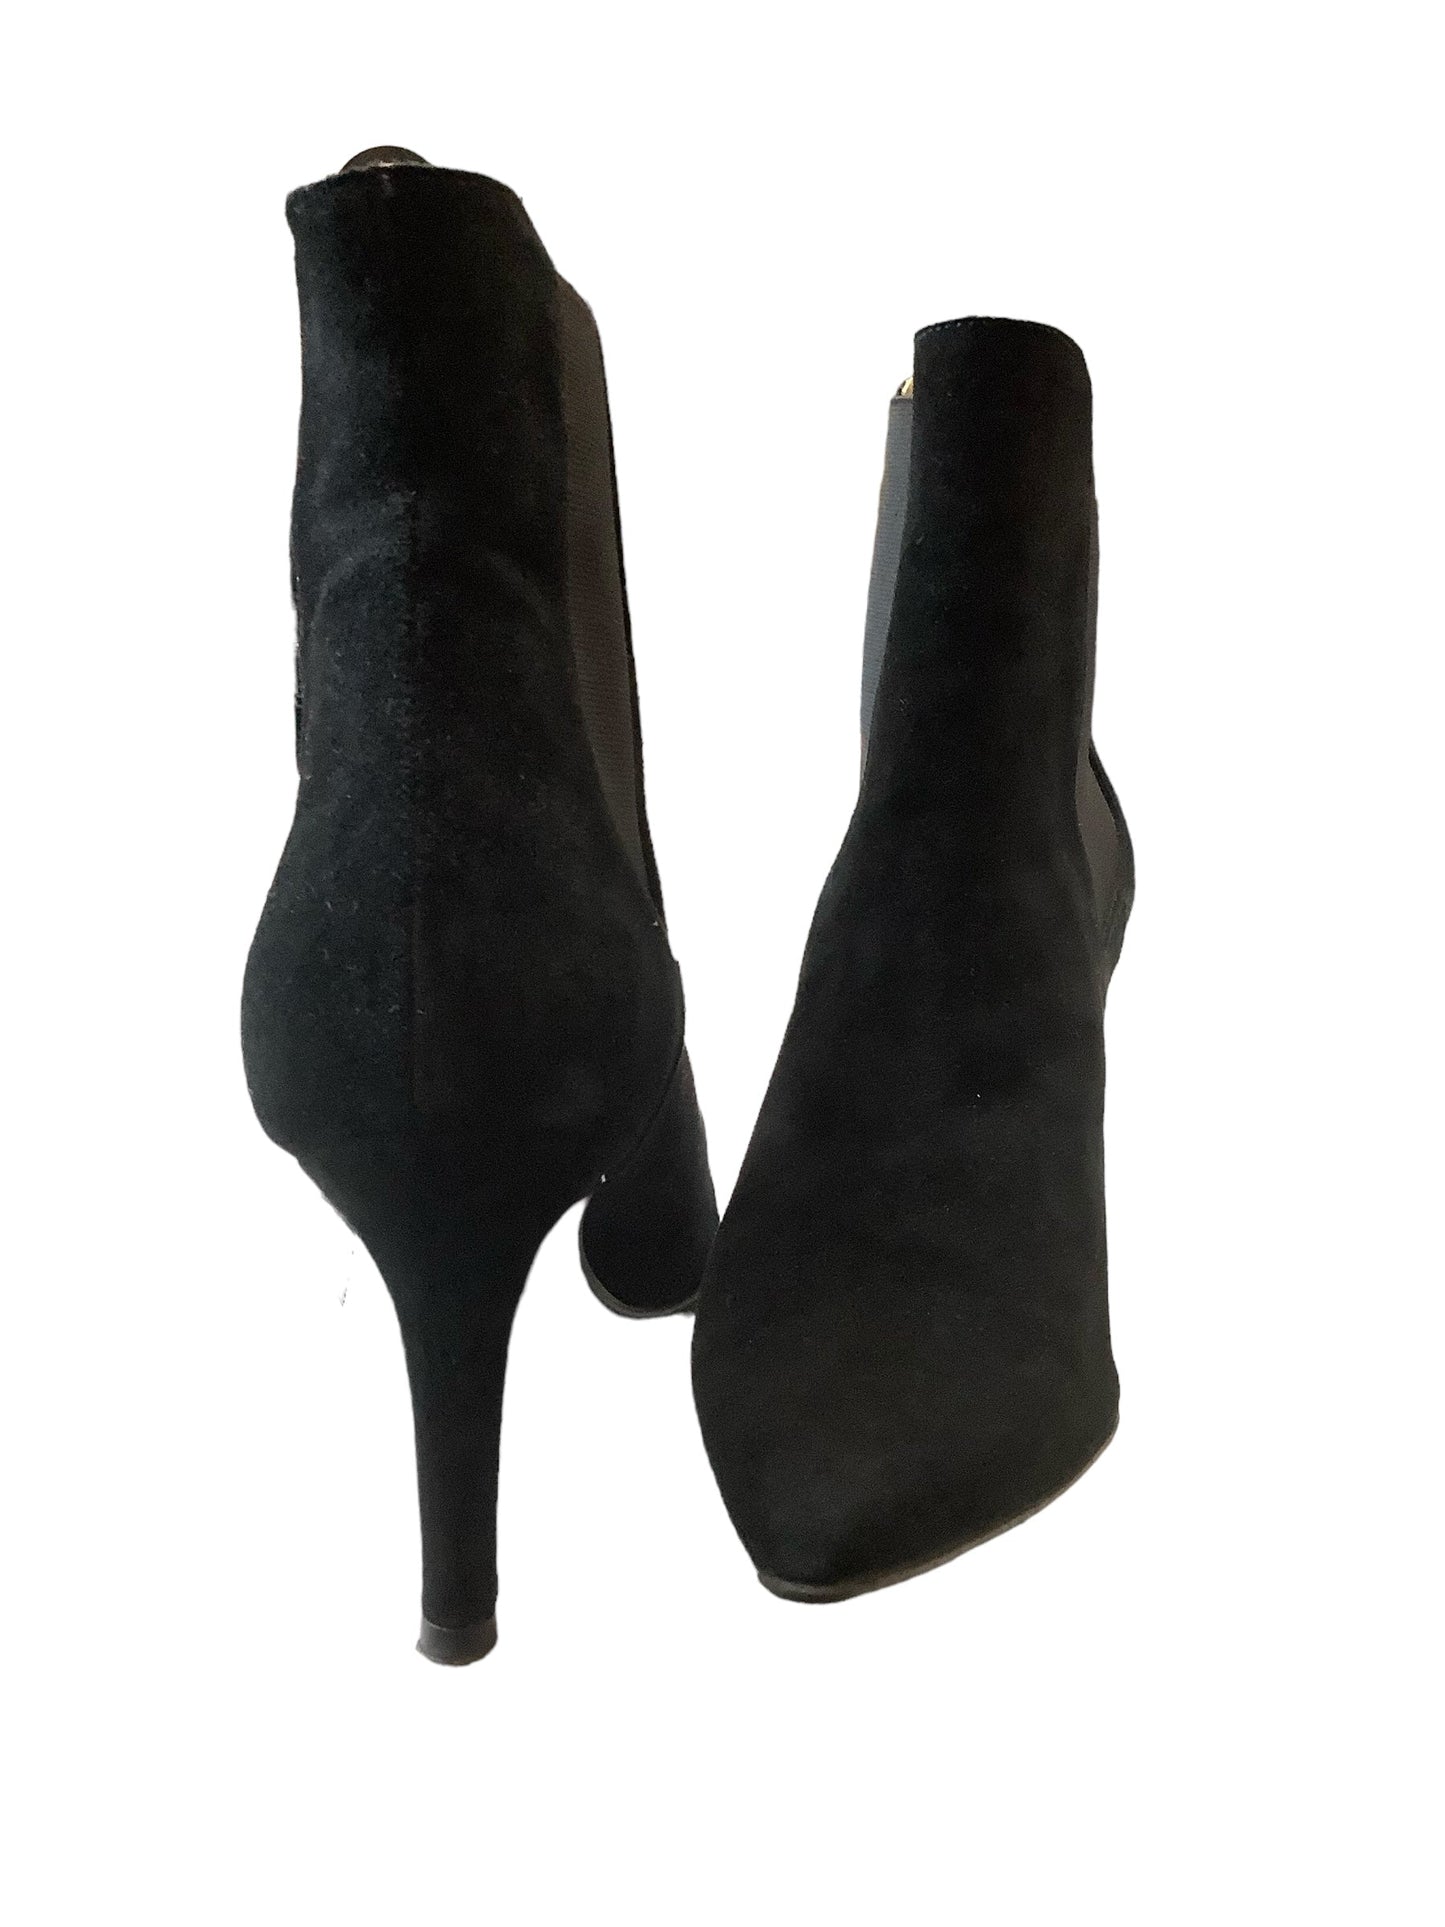 Black Boots Ankle Heels Cmc, Size 8